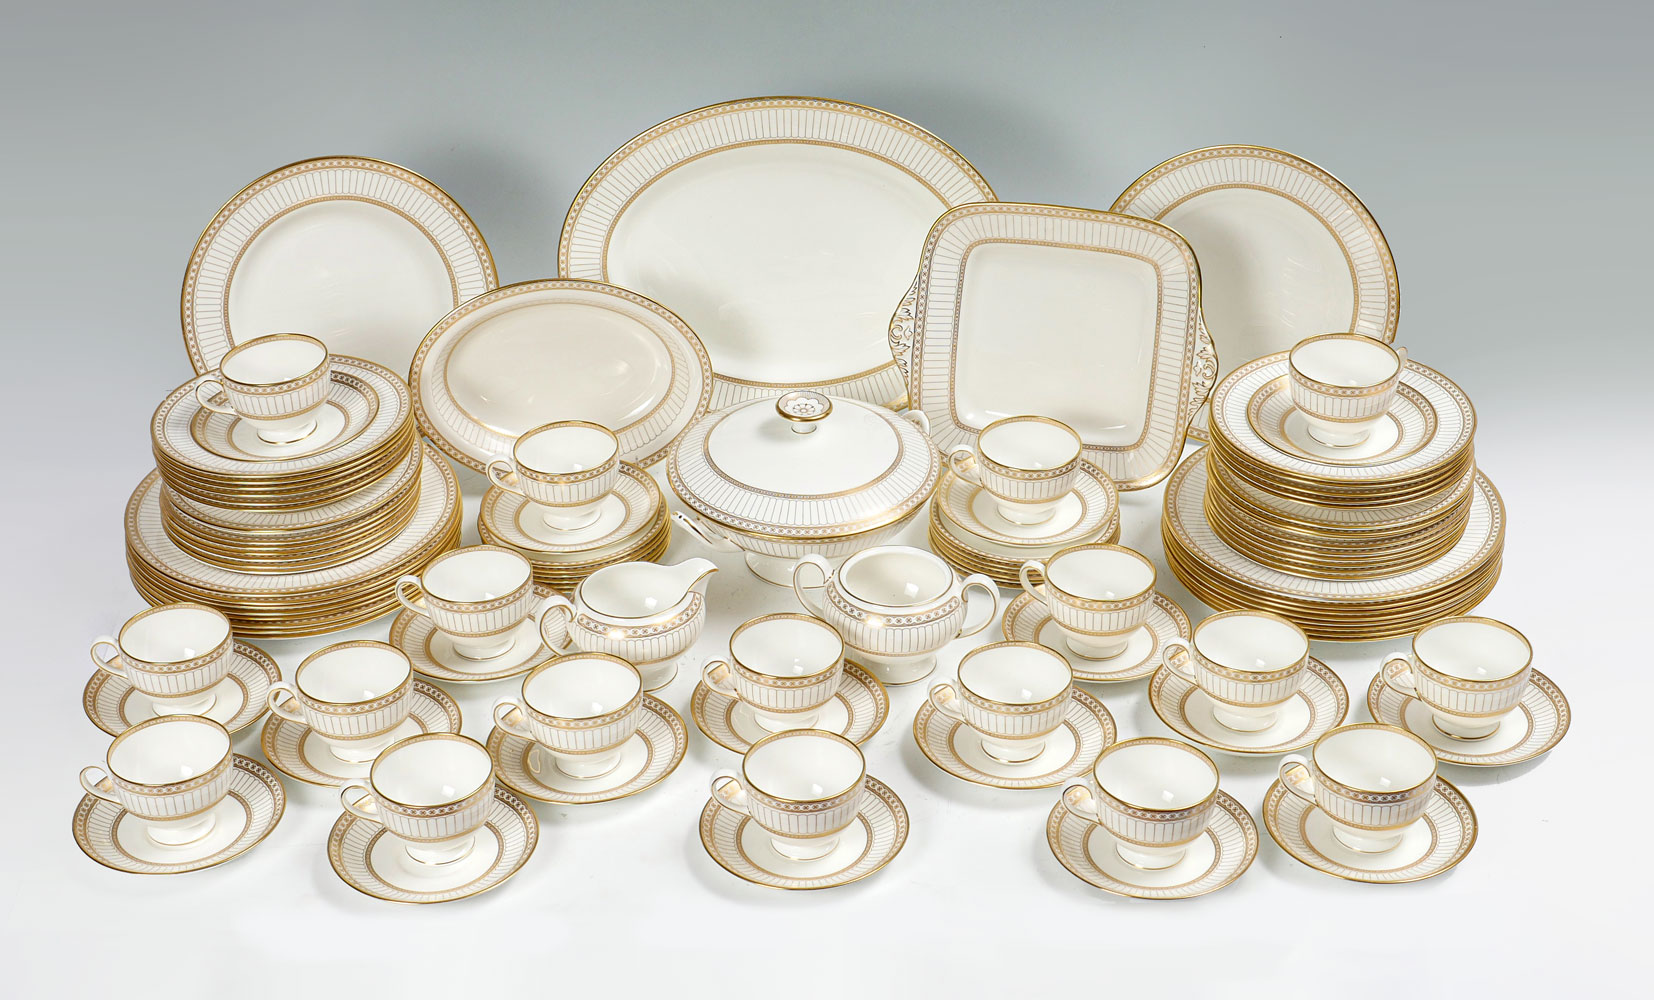 LARGE WEDGWOOD COLONNADE GOLD CHINA